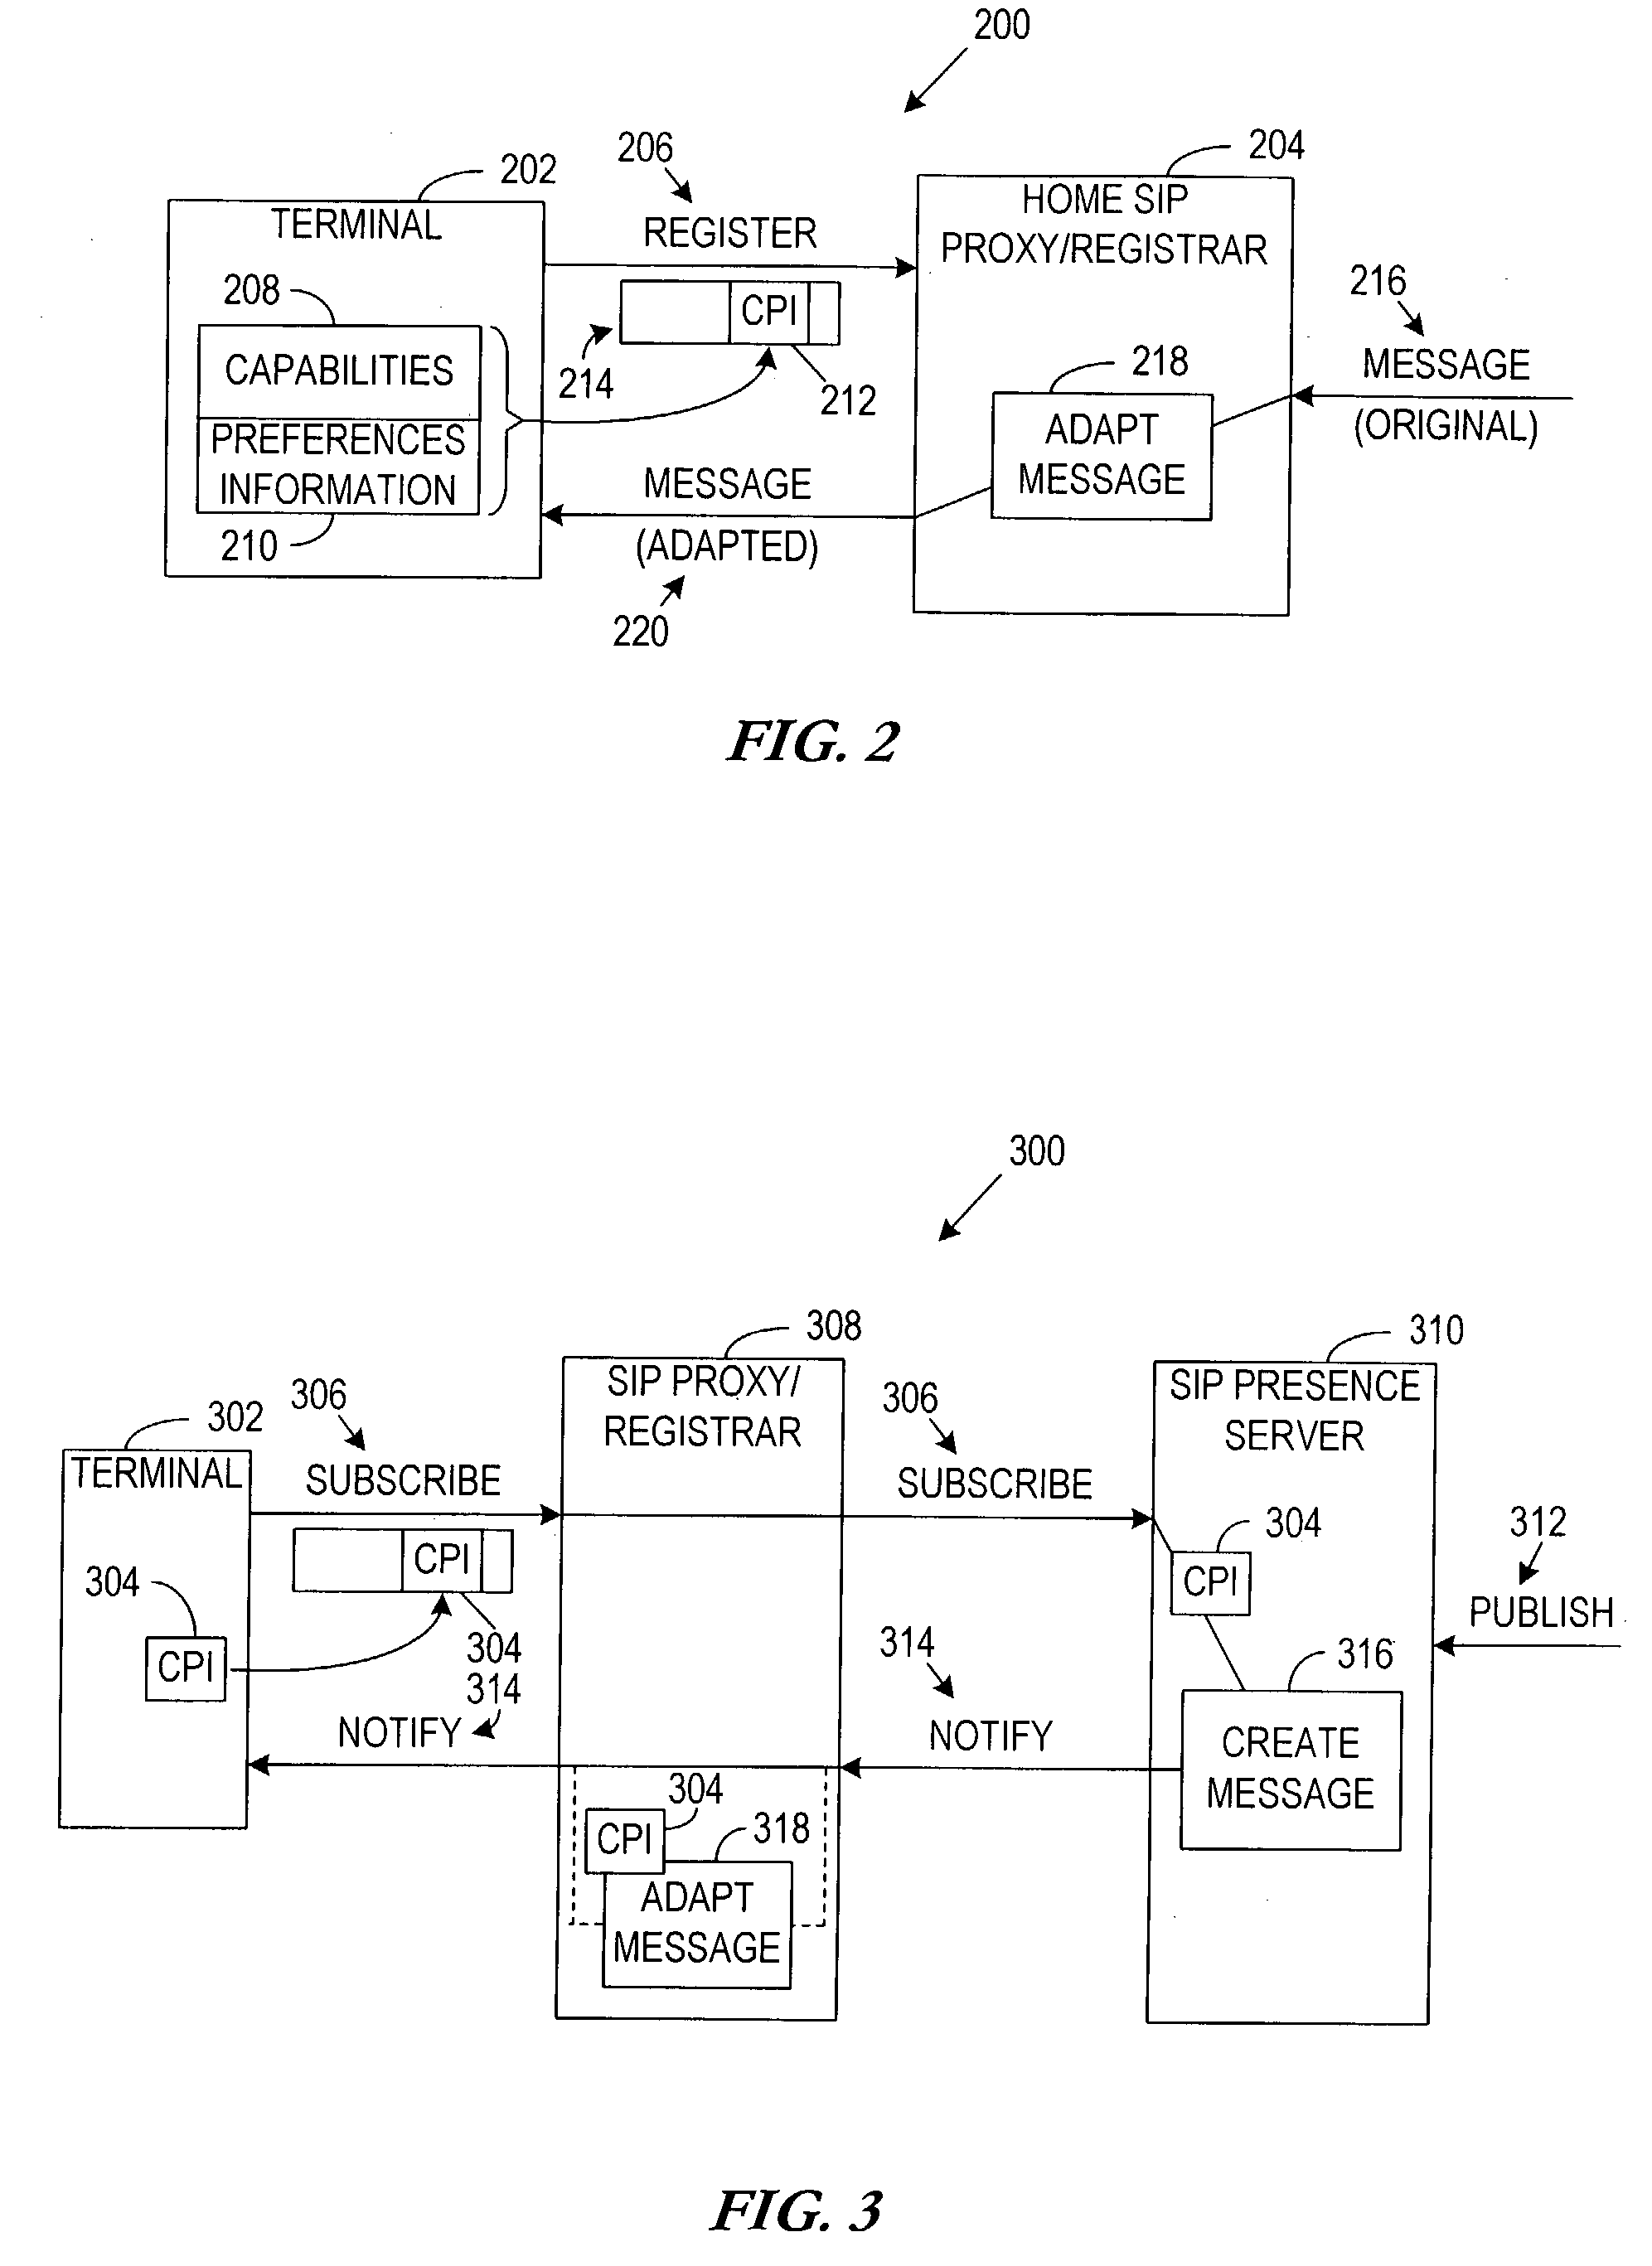 System and method for conveying terminal capability and user preferences-dependent content characteristics for content adaptation